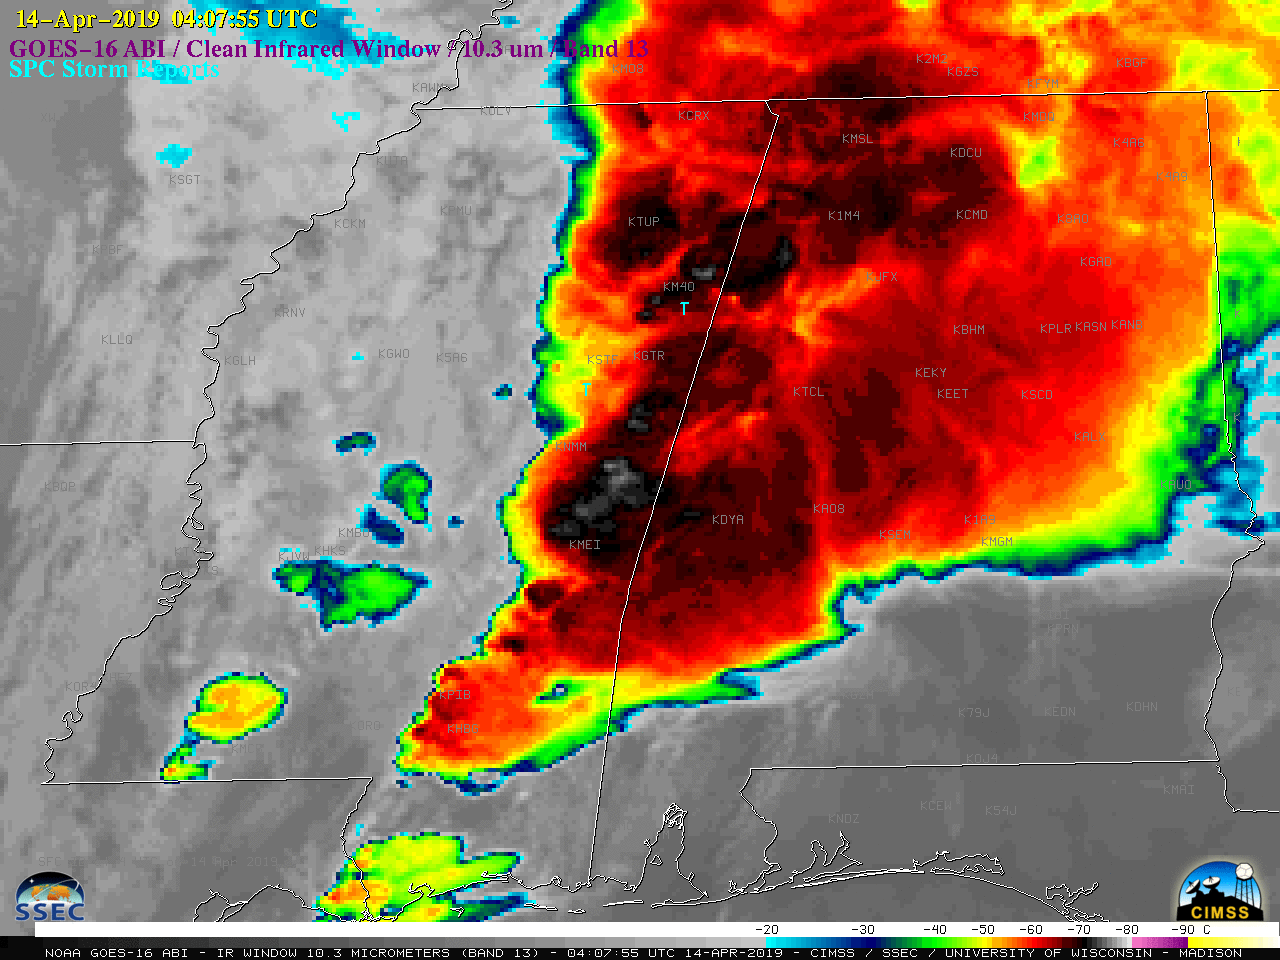 GOES-16 "Clean" Infrared Window (10.3 µm) images, with SPC storm reports plotted in cyan [click to play MP4 animation]